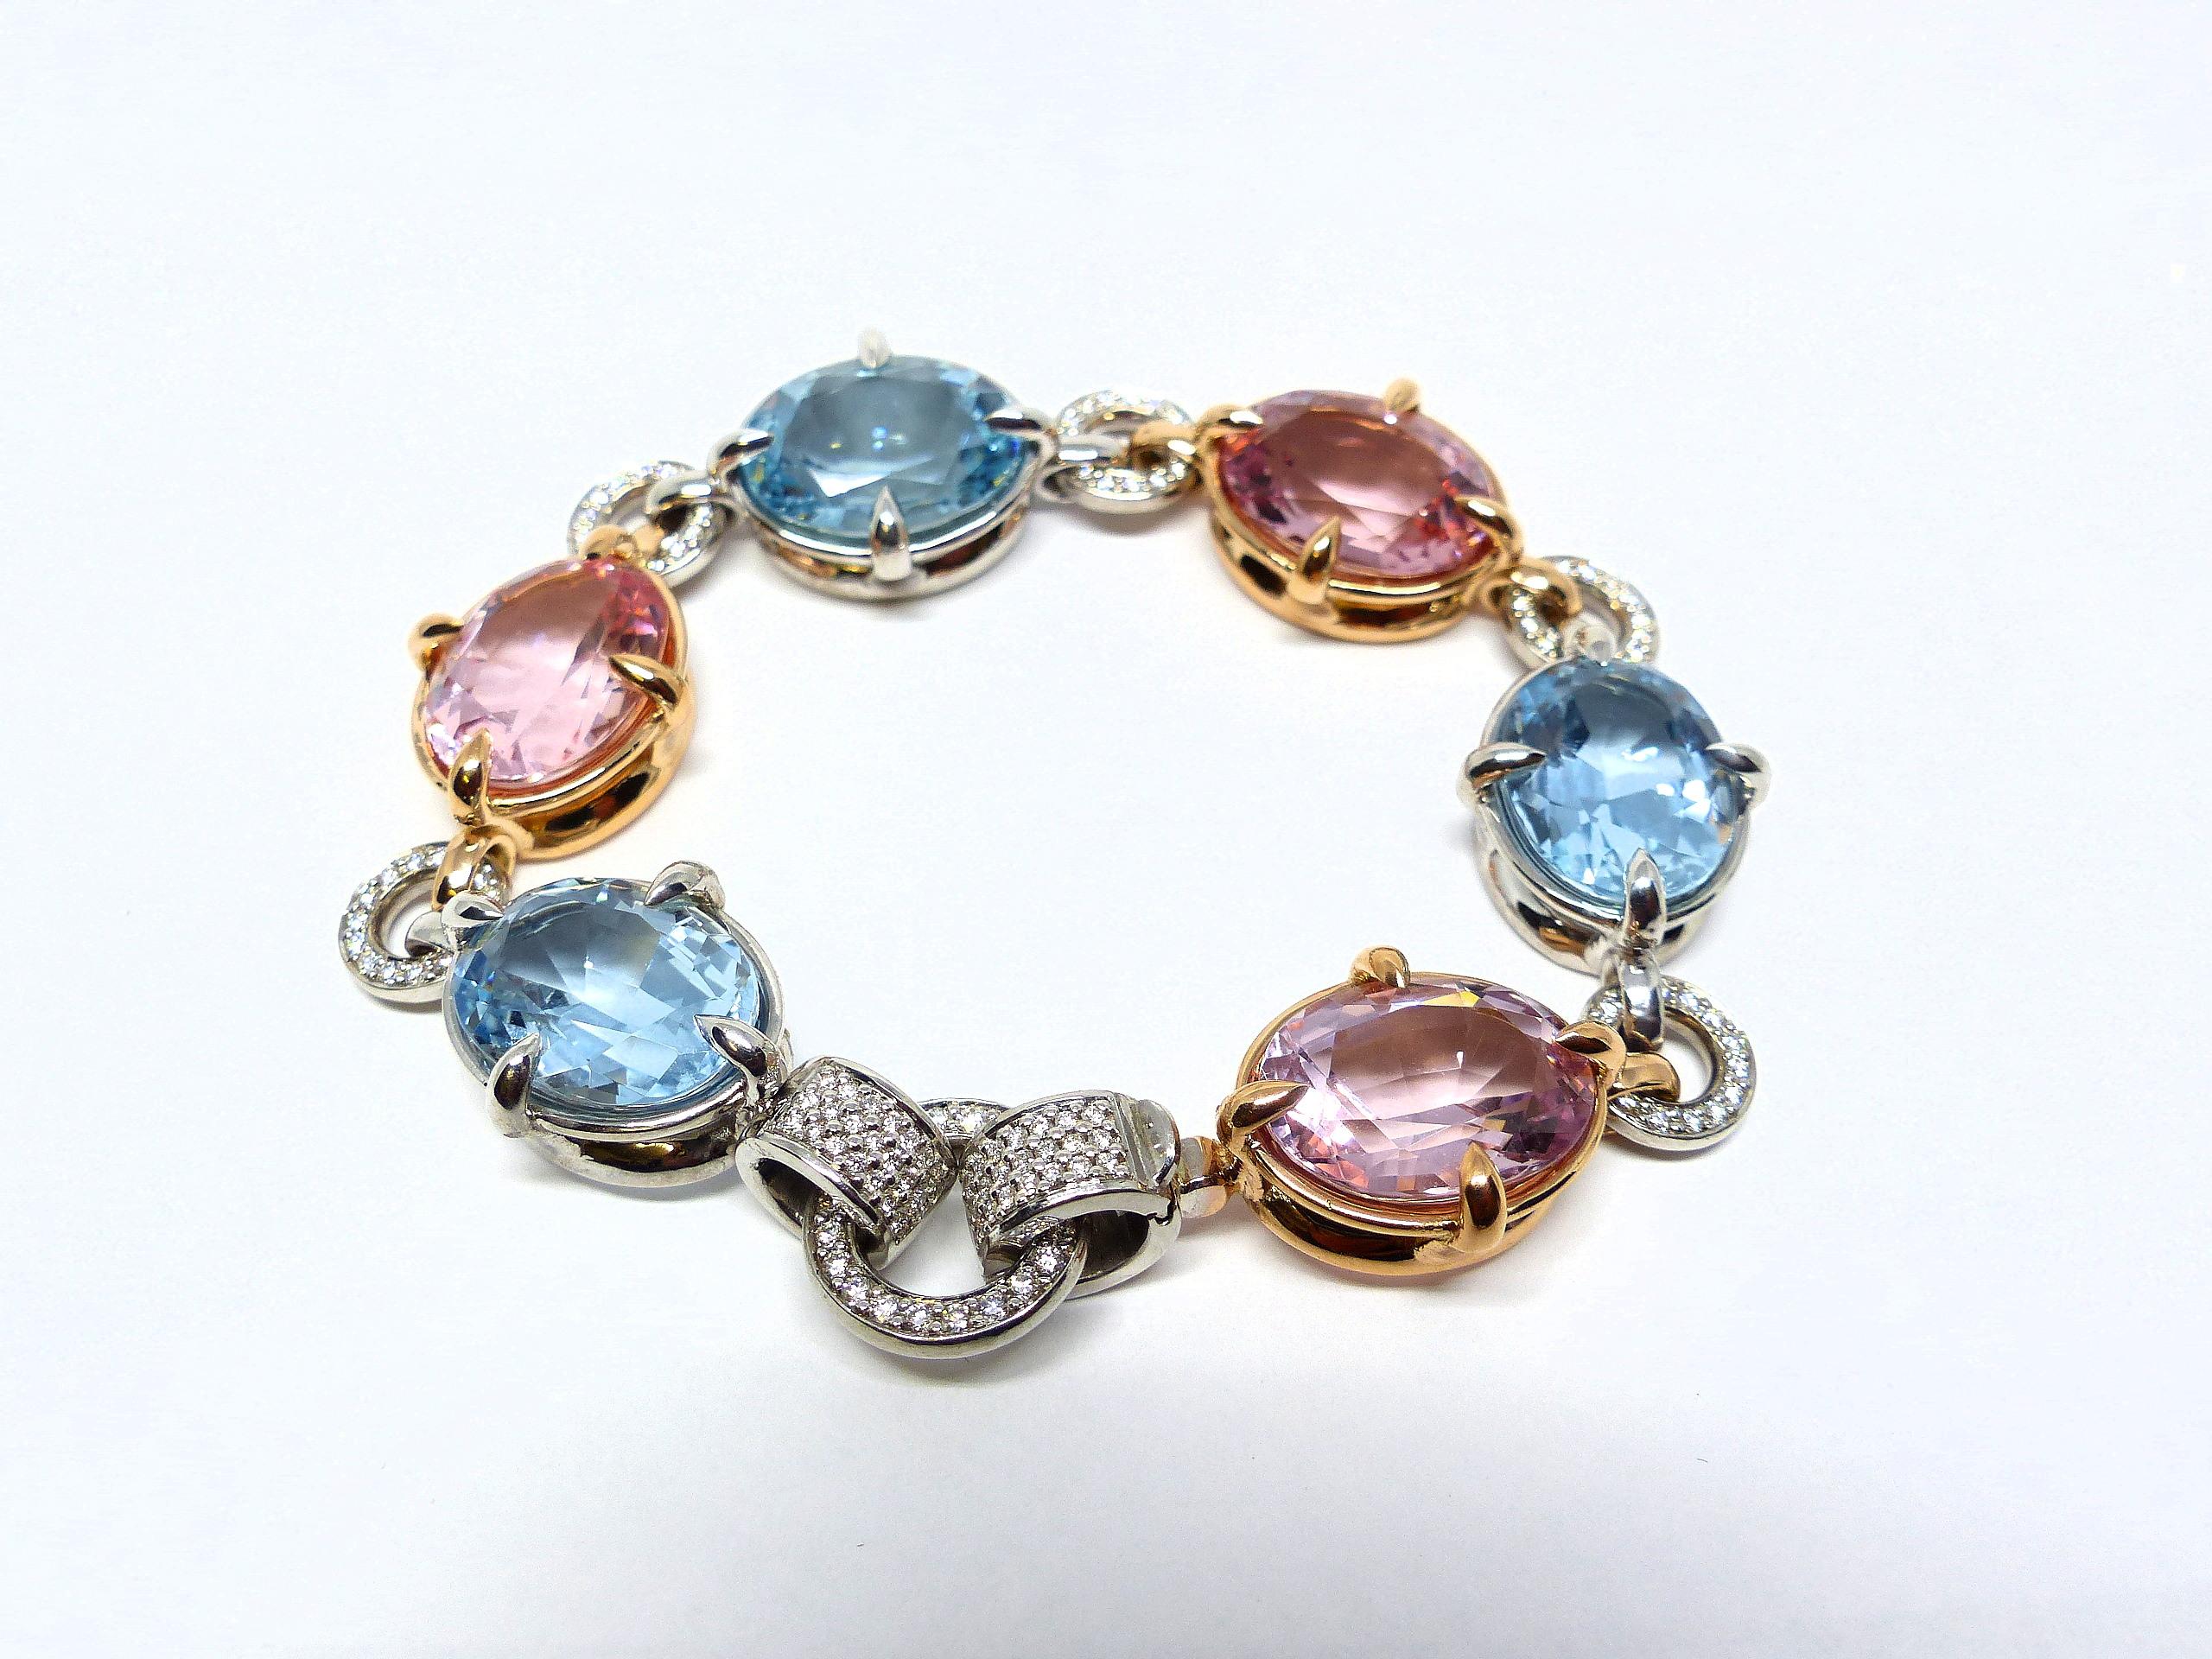 Thomas Leyser is renowned for his contemporary jewellery designs utilizing fine gemstones.

This 18k white and red gold (55.17g) bracelet is set with 6x fine Aquamarines & Morganites in magnificient intensiv blue and rose colour (with large